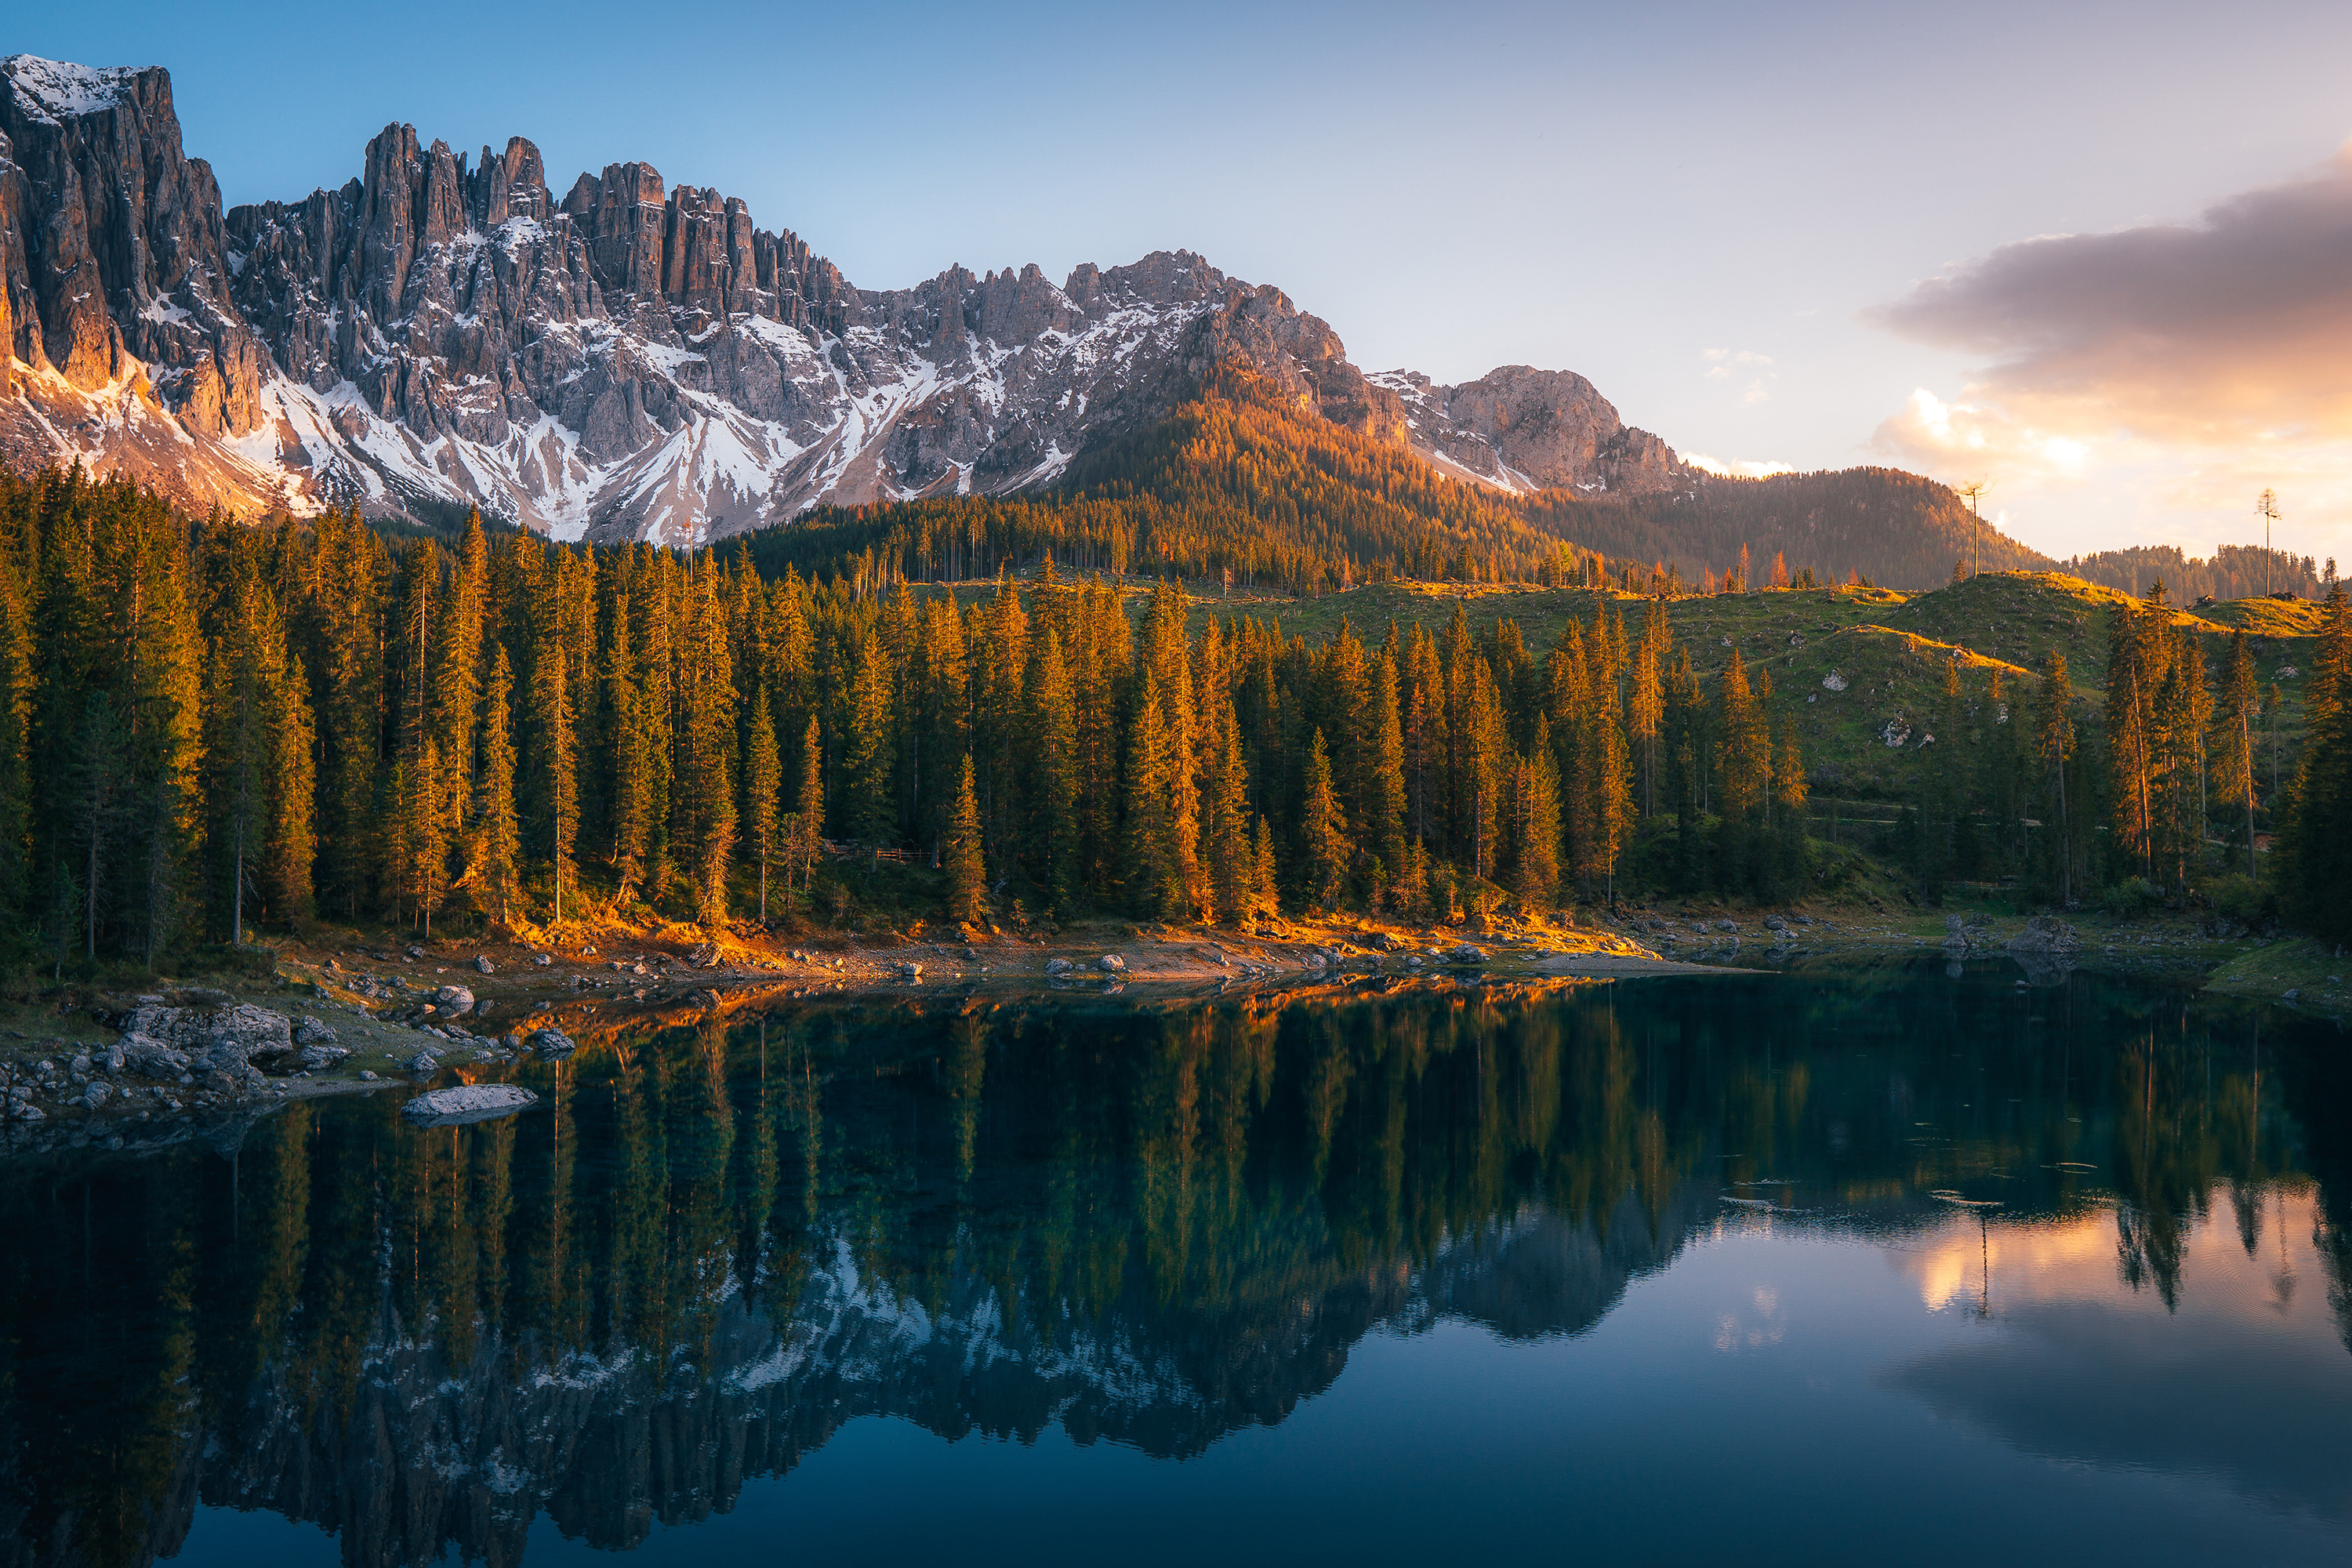 General 3000x2000 landscape nature forest mountains snow lake reflection water trees clouds sky Dolomites Italy South Tyrol